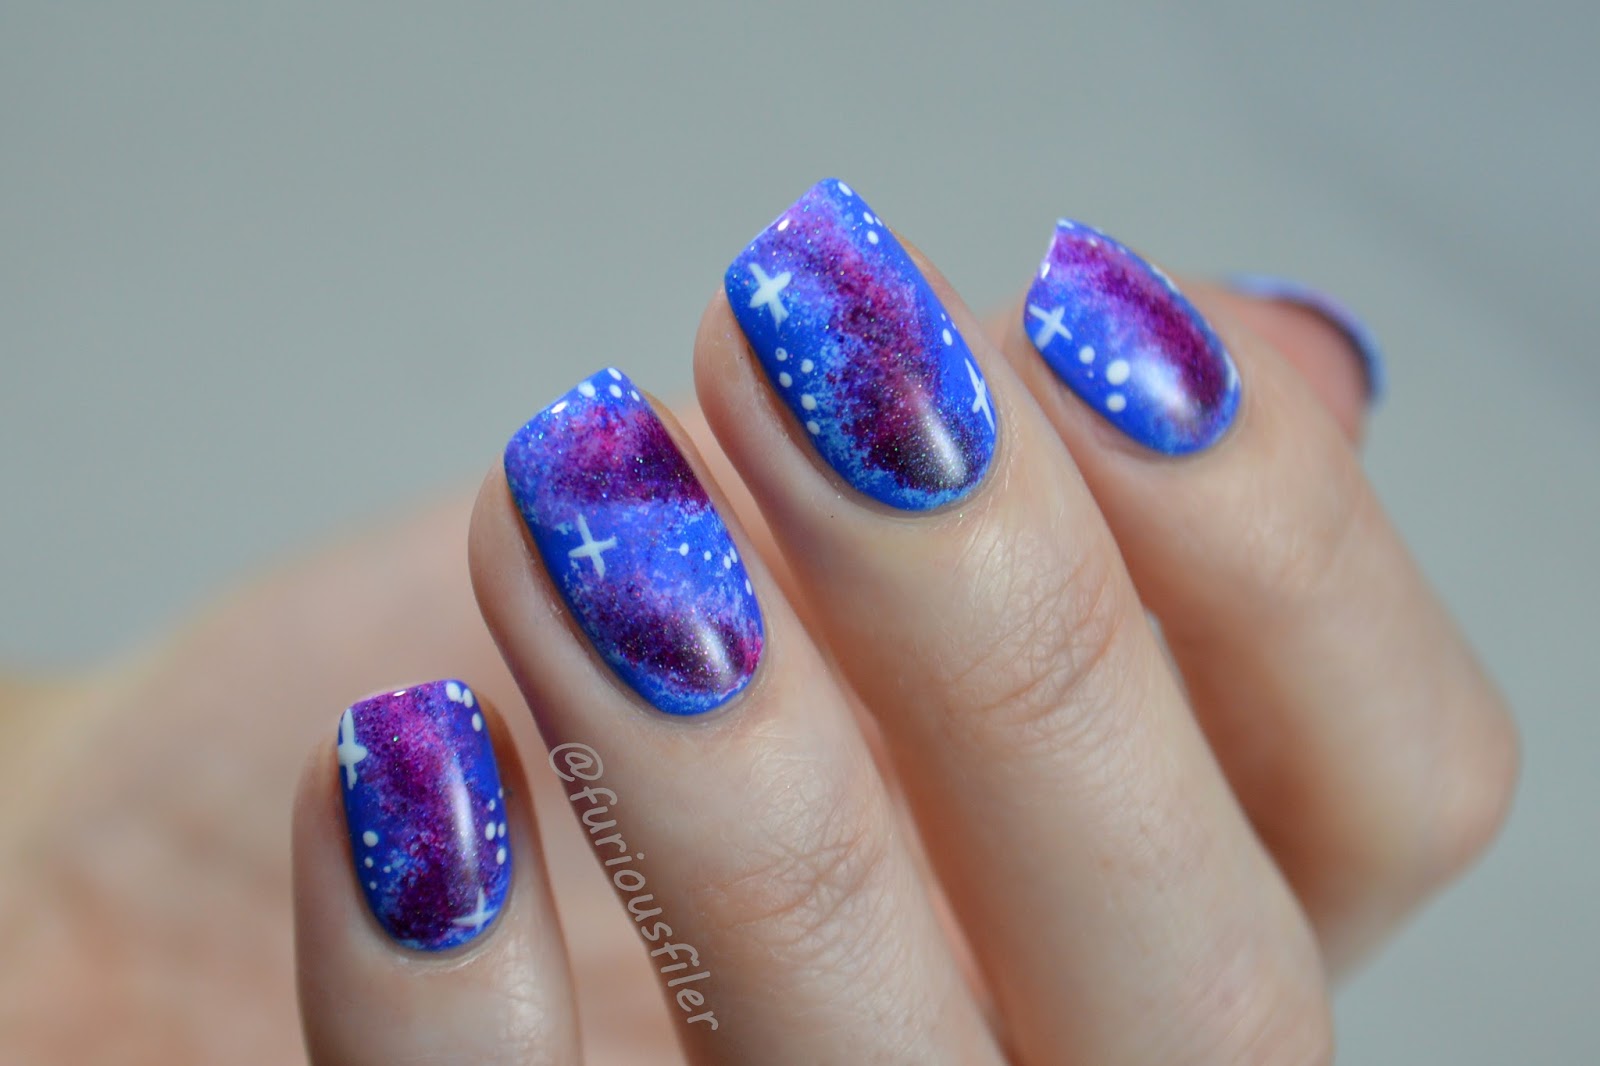 6. Pink and Purple Galaxy Nail Art with Rhinestones - wide 3